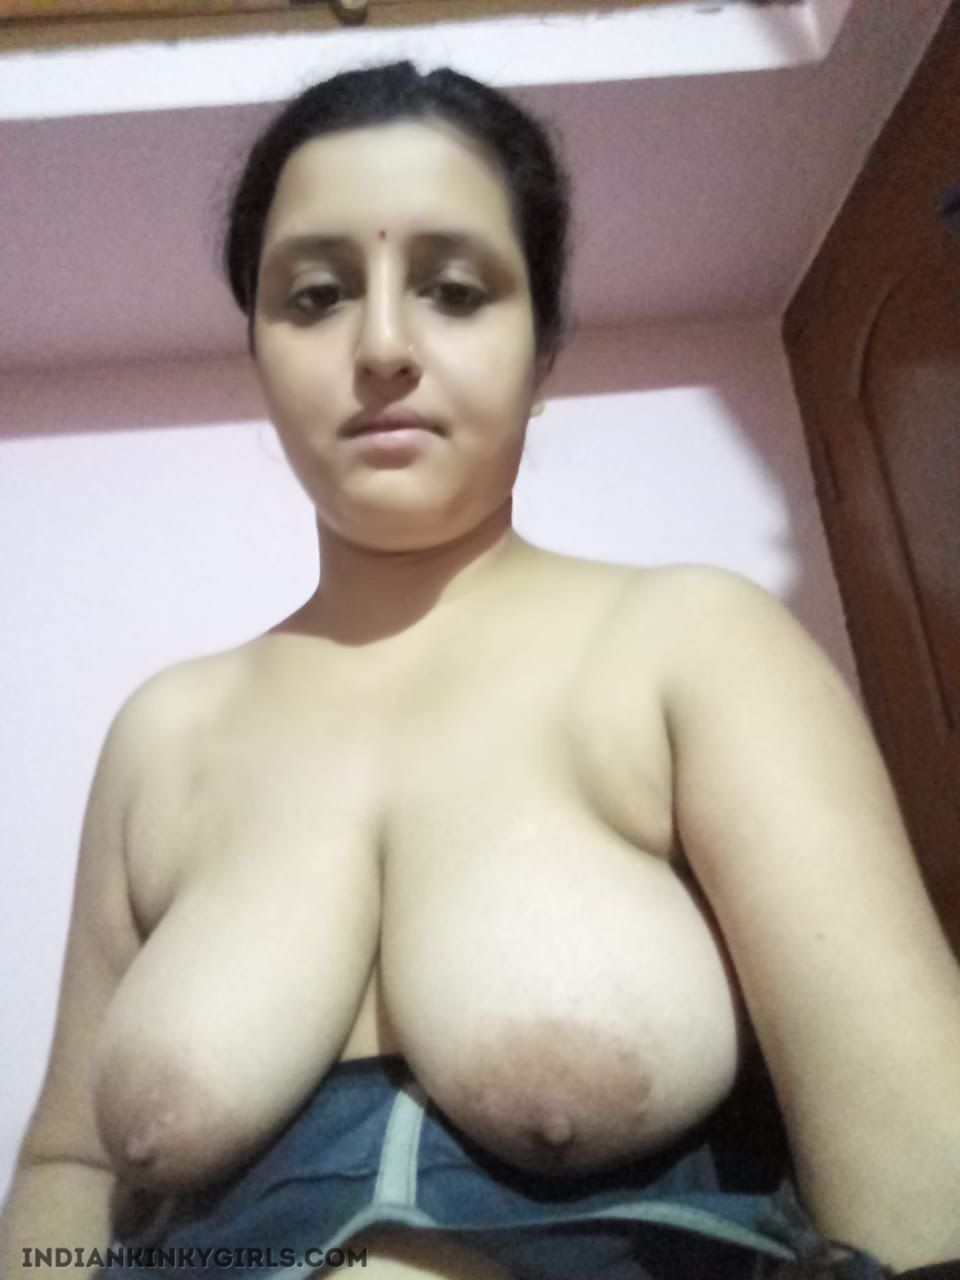 Sexy Indian Wife With Big Boobs Nude Selfies photo pic